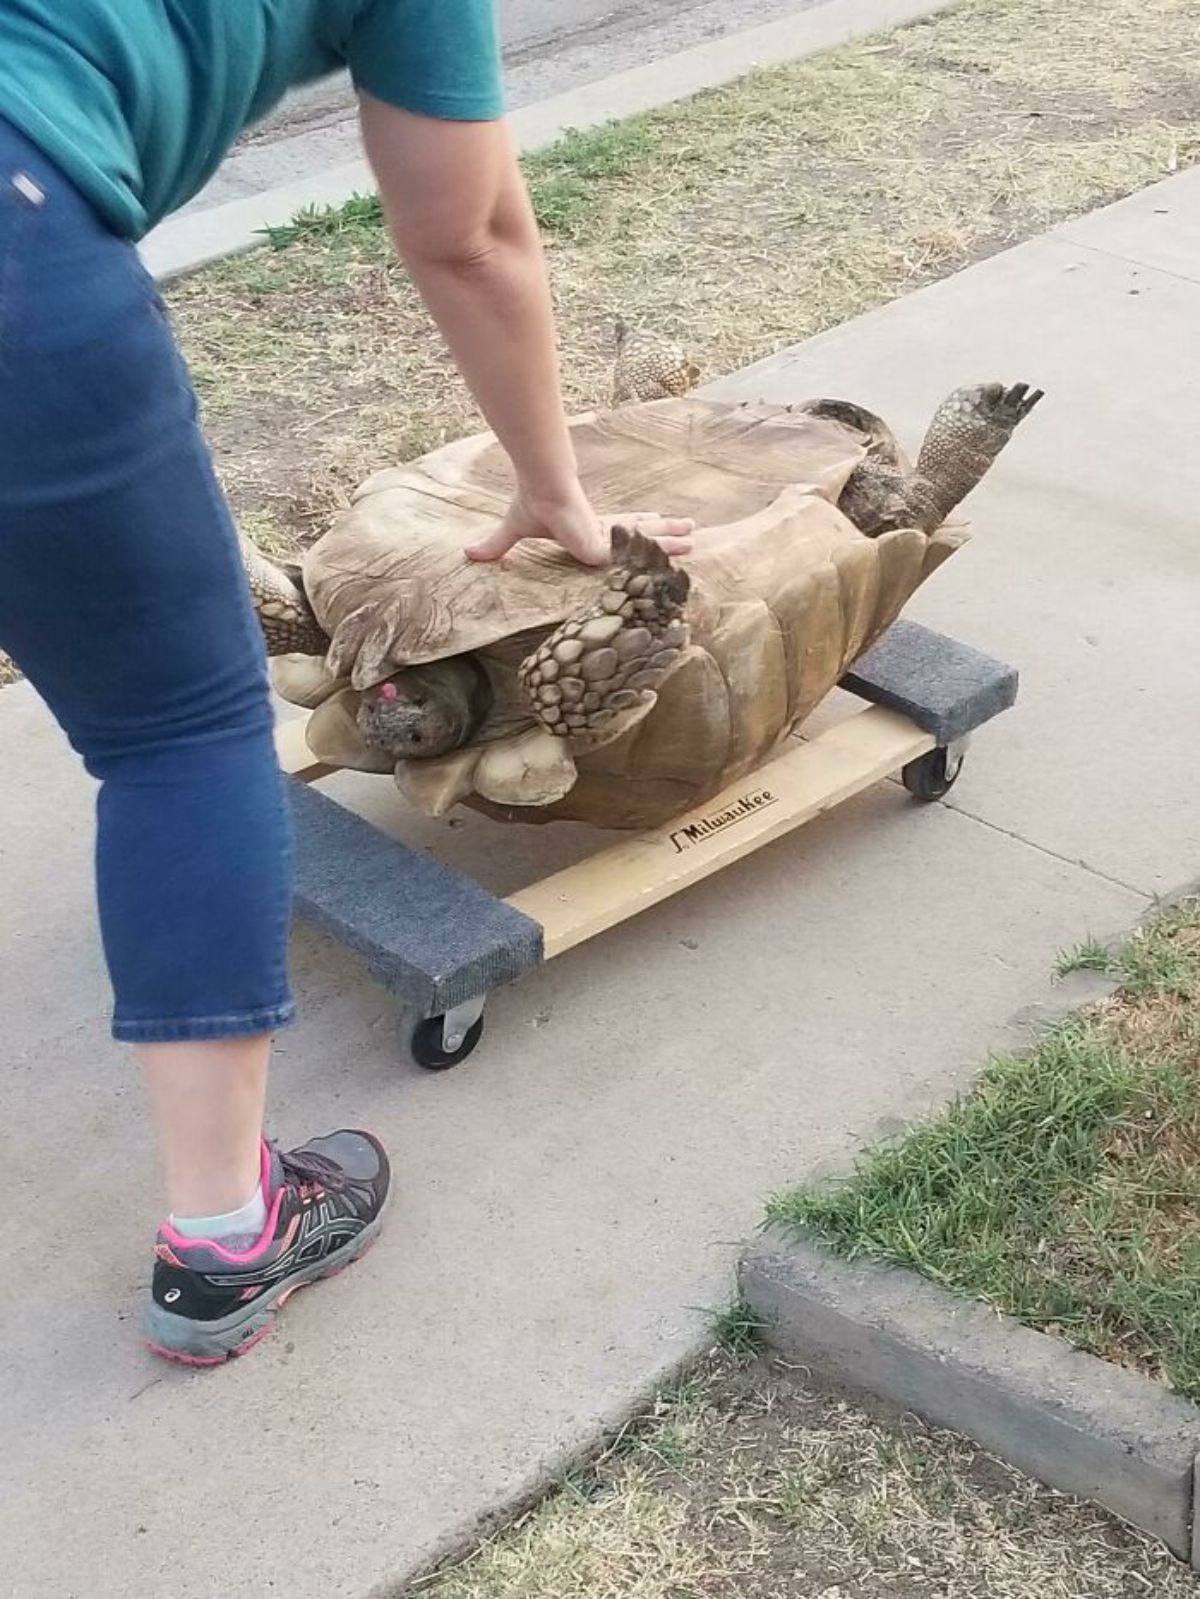 a tortoise upside down on a makeshift platform with wheels being pushed by someone